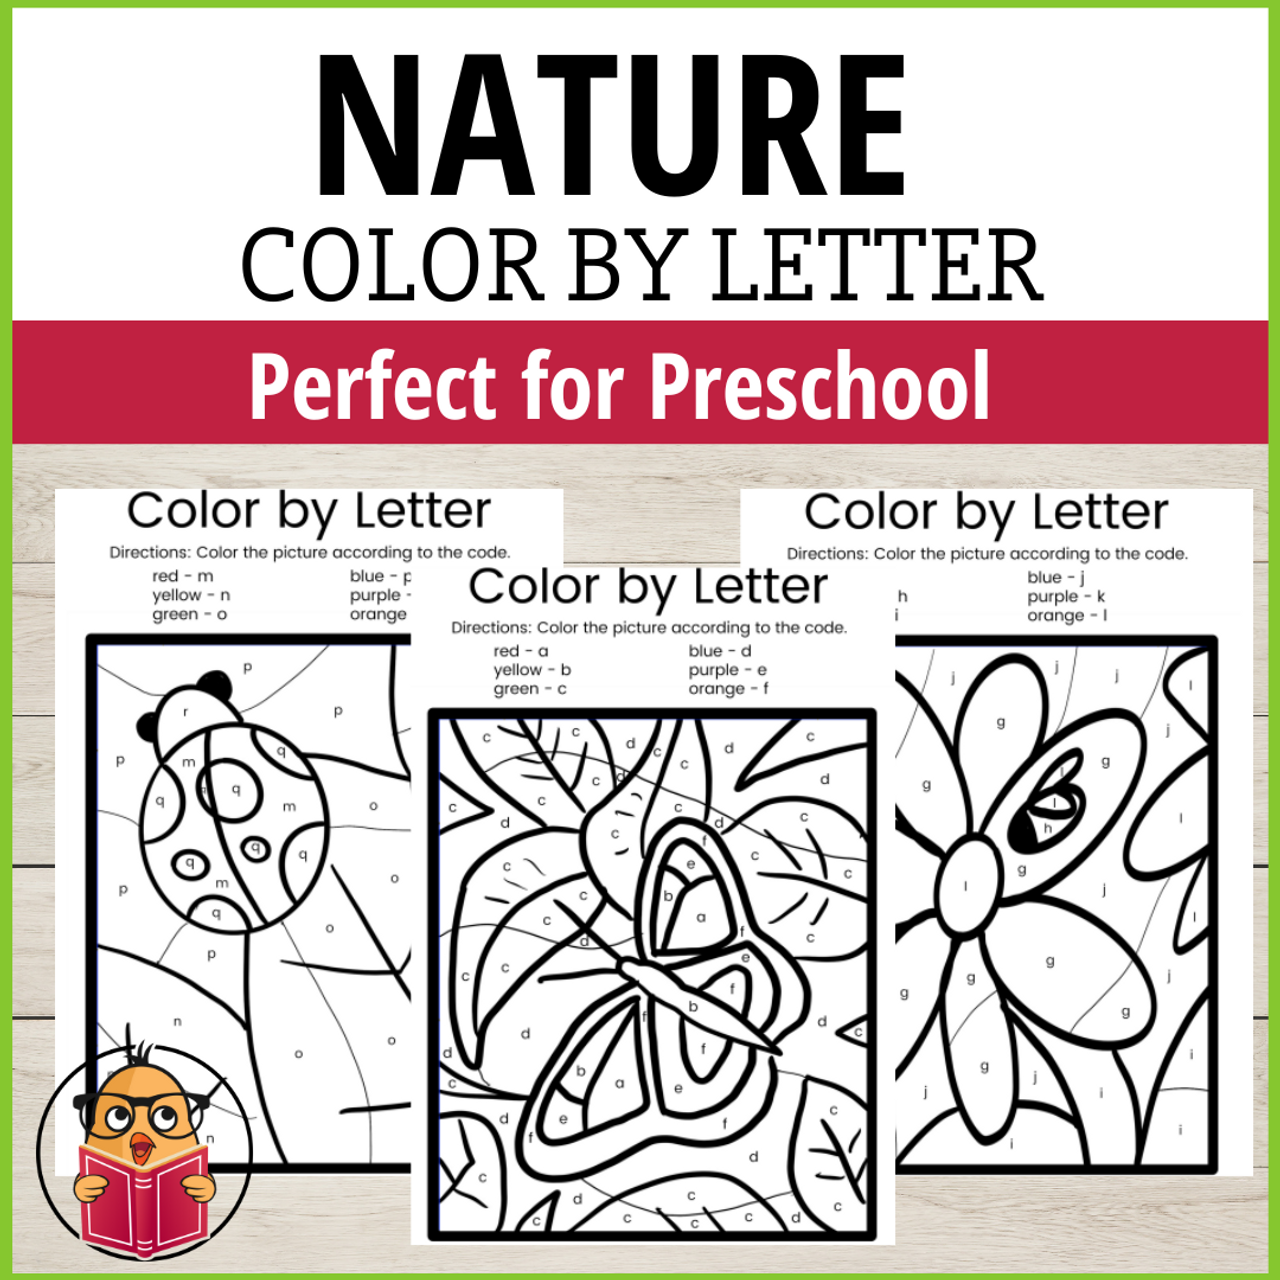 Nature Color by Letter